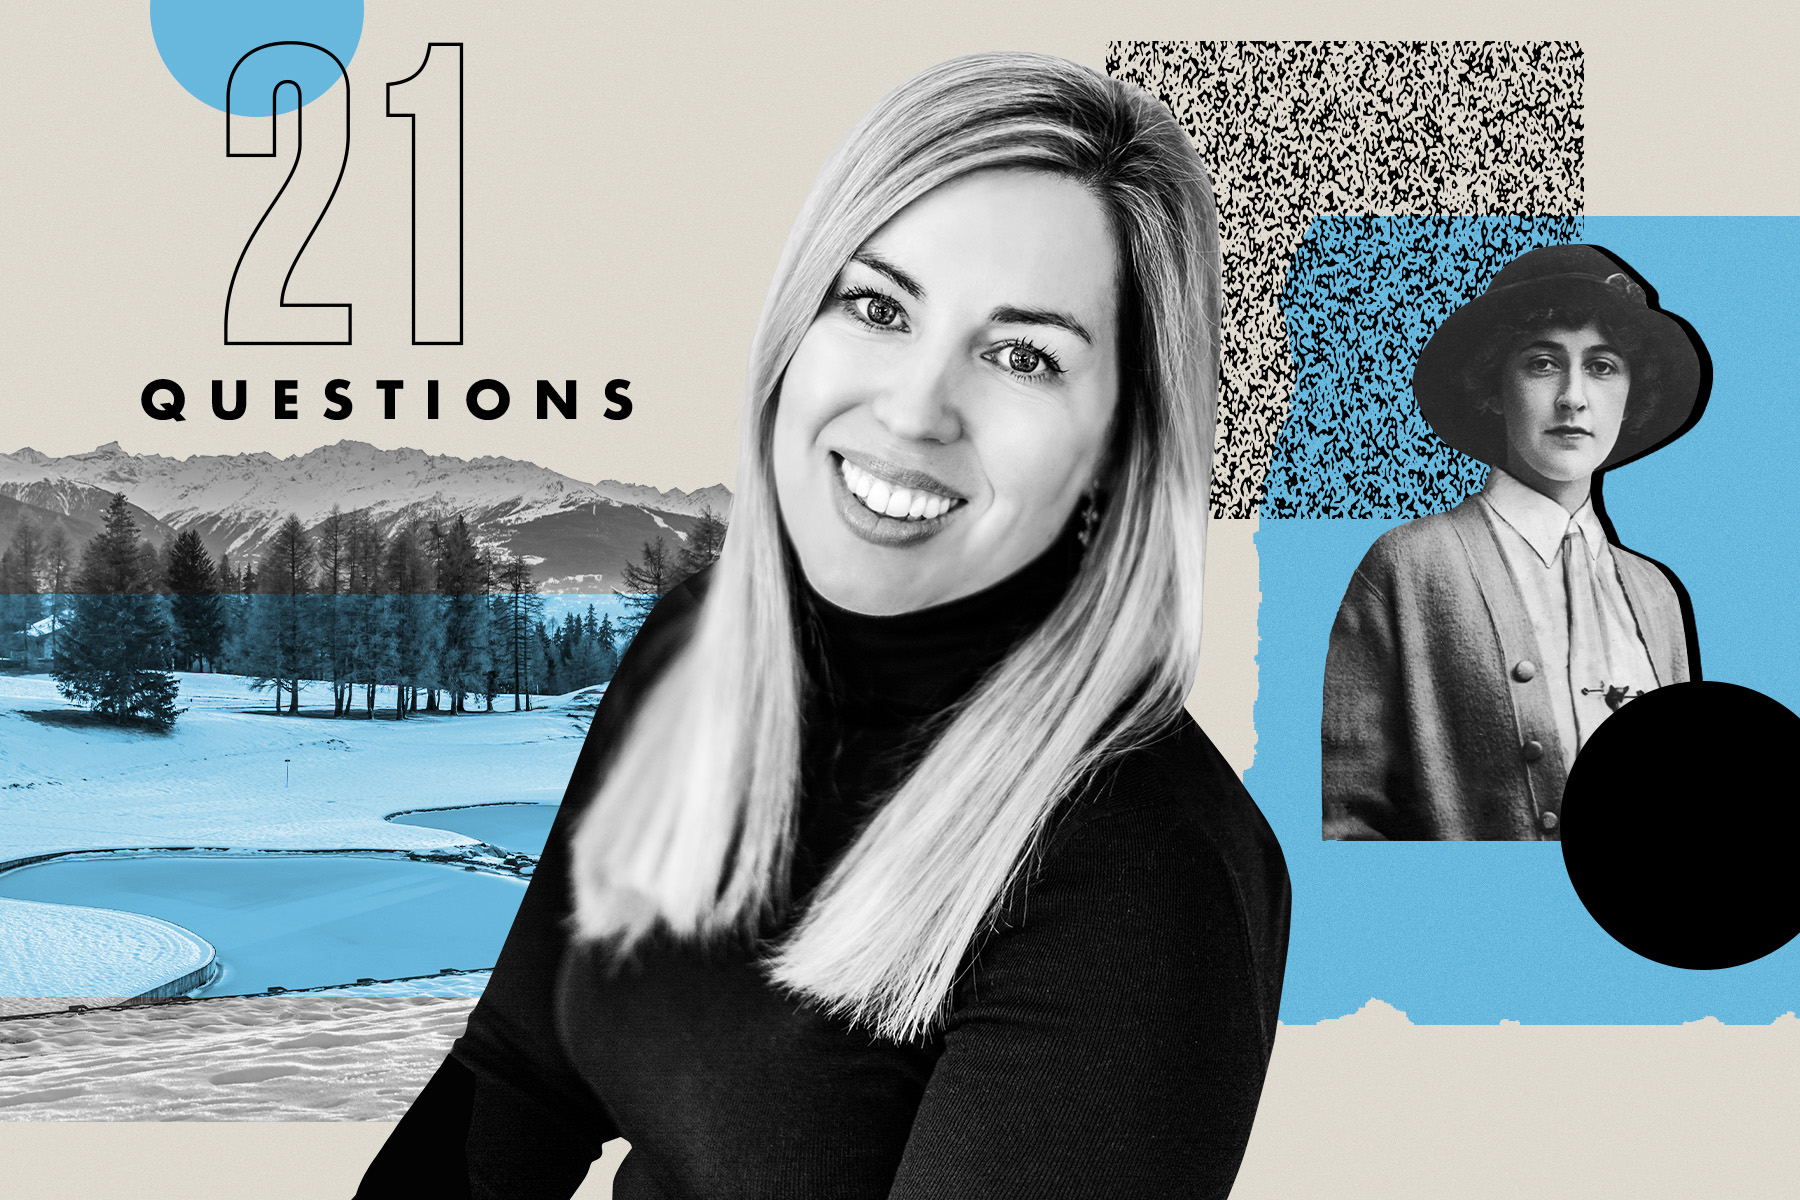 A photo of Sarah Pearse in black and white against an blue-tinged background, with a ski slope, Agatha Christie and the words "21 questions" in the top right hand corner 